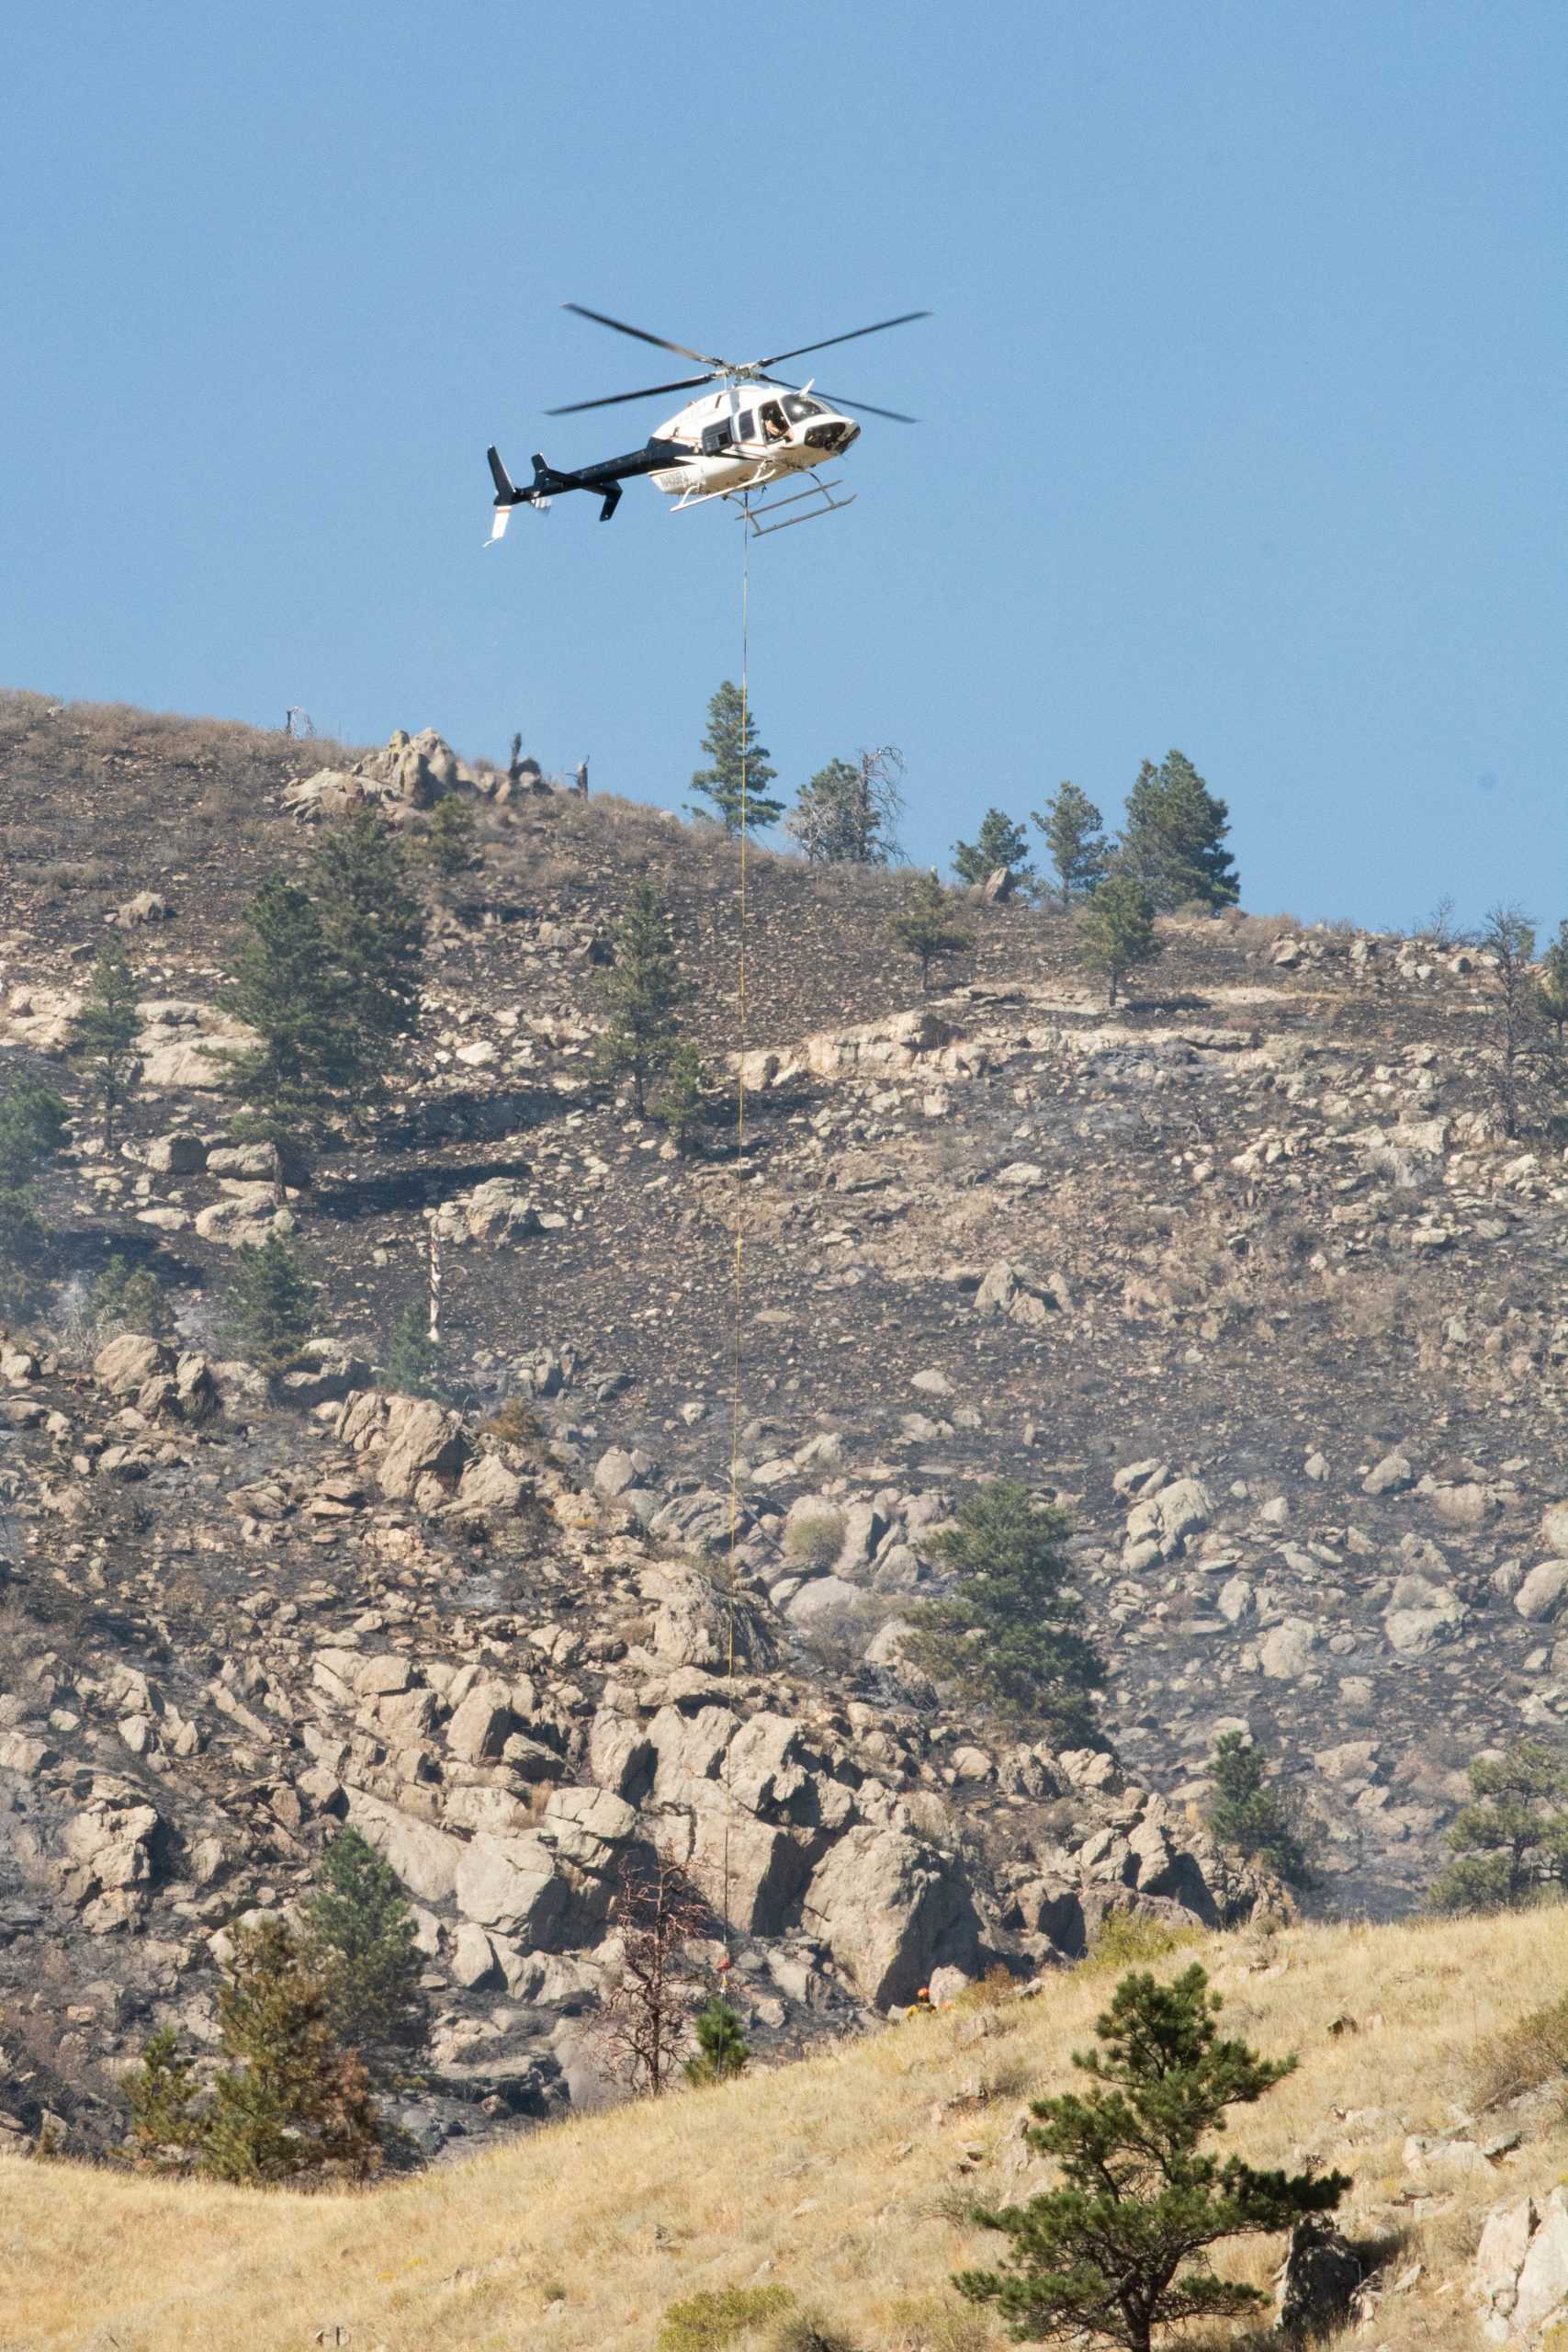 231-acre+Seaman+Fire+at+35+percent+containment